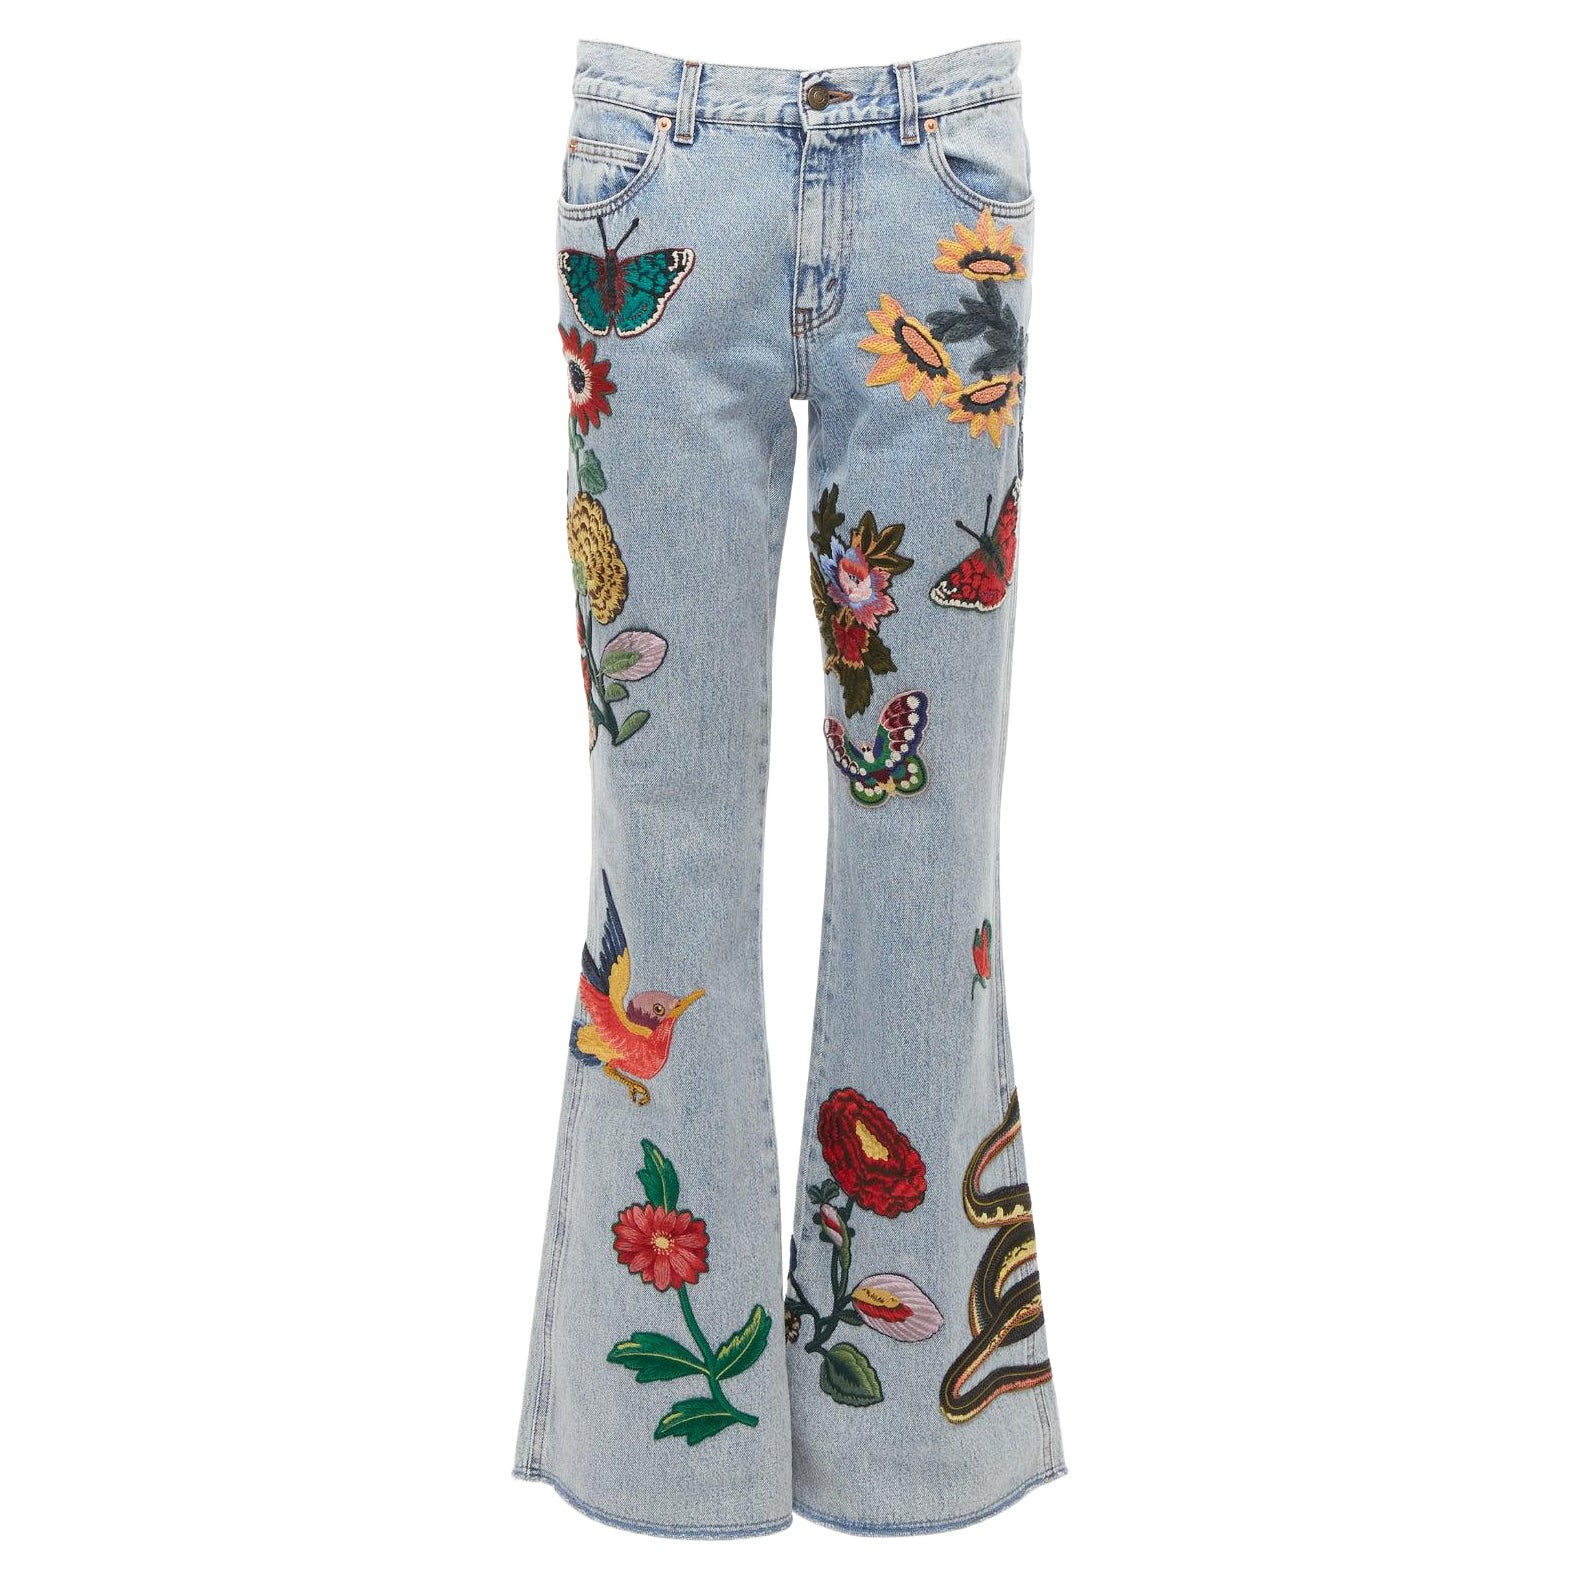 GUCCI Alessandro Michele flower embroidery patch flare hippie jeans 24" For Sale